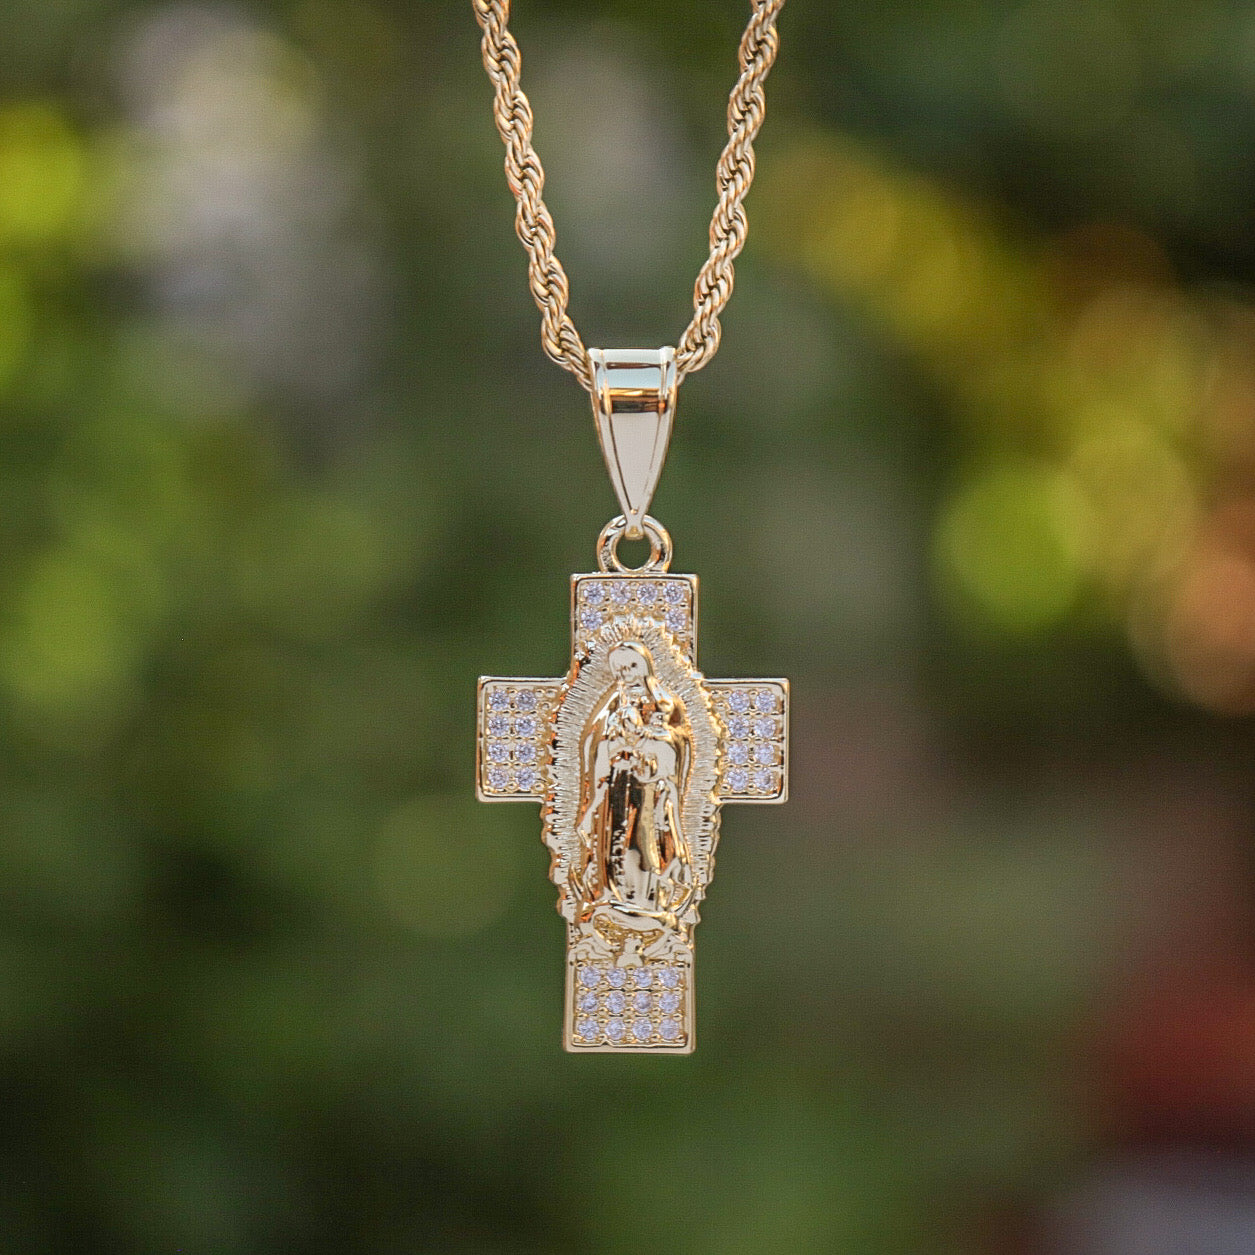 Virgin Mary Cross Necklace - Gold